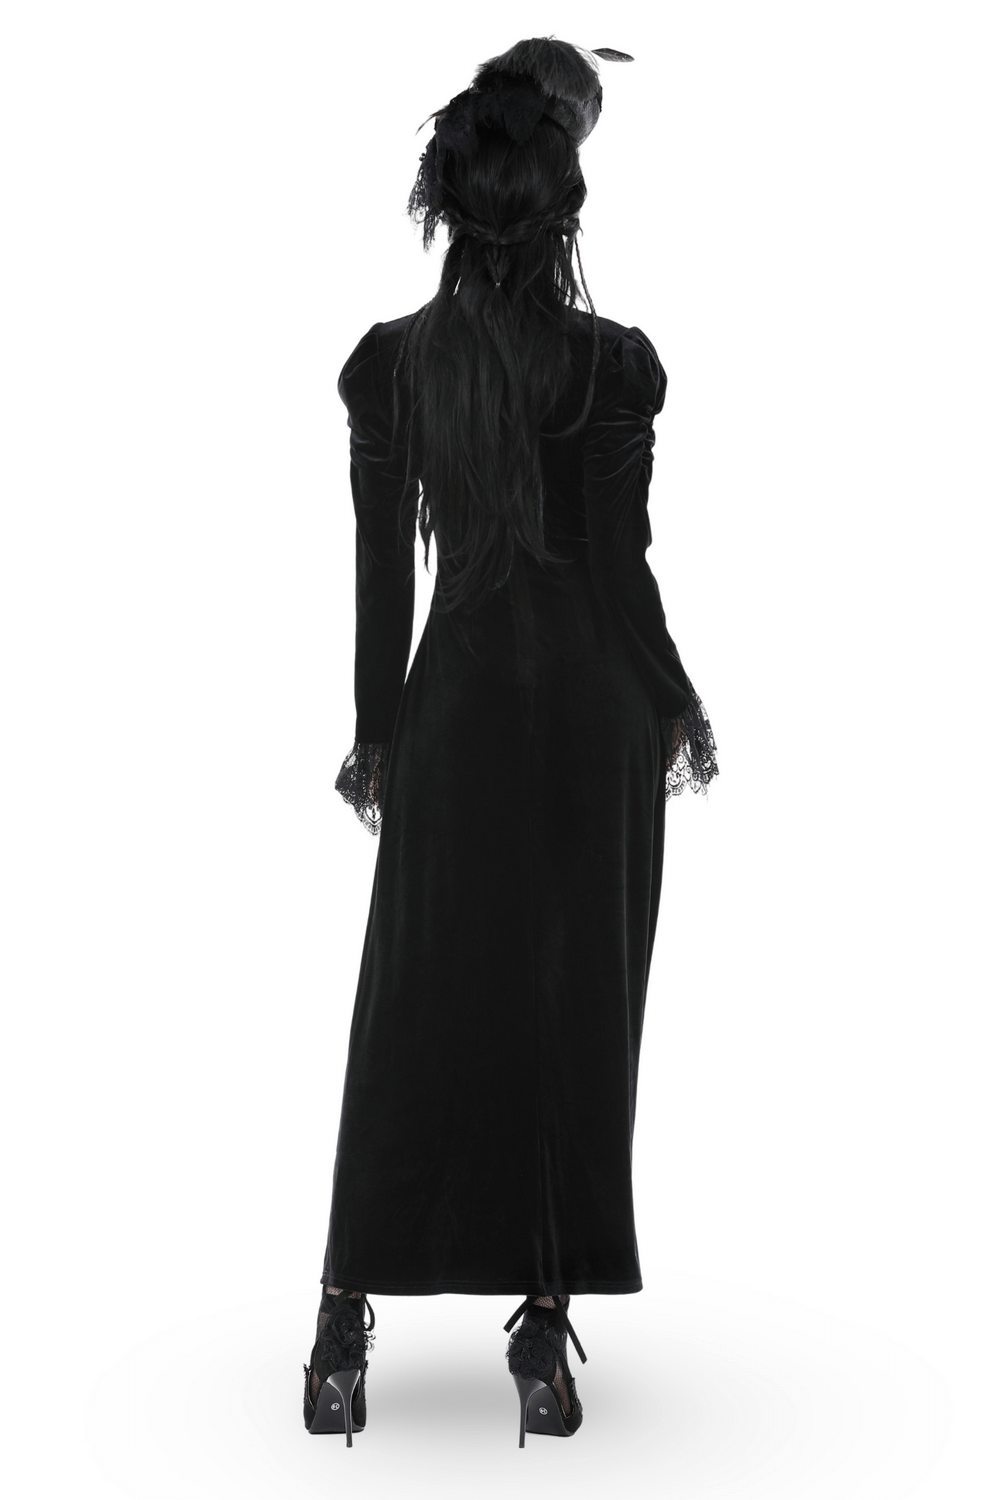 Black Gothic Velvet Dress With Lace Sleeves